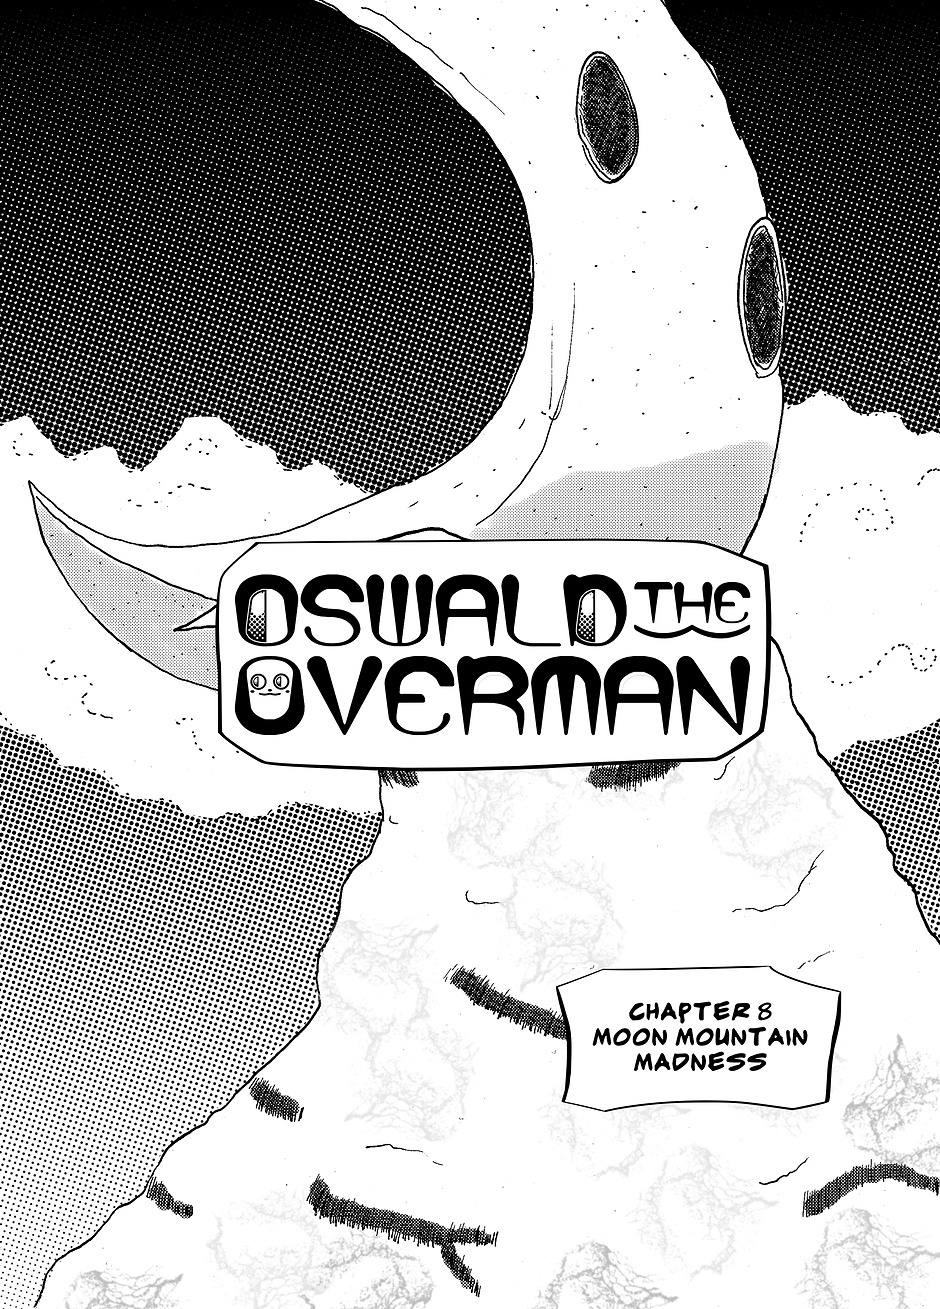 Oswald The Overman In The Lesser Planes Of Hell Vol.1 Chapter 8: Moon Mountain Madness - Picture 2